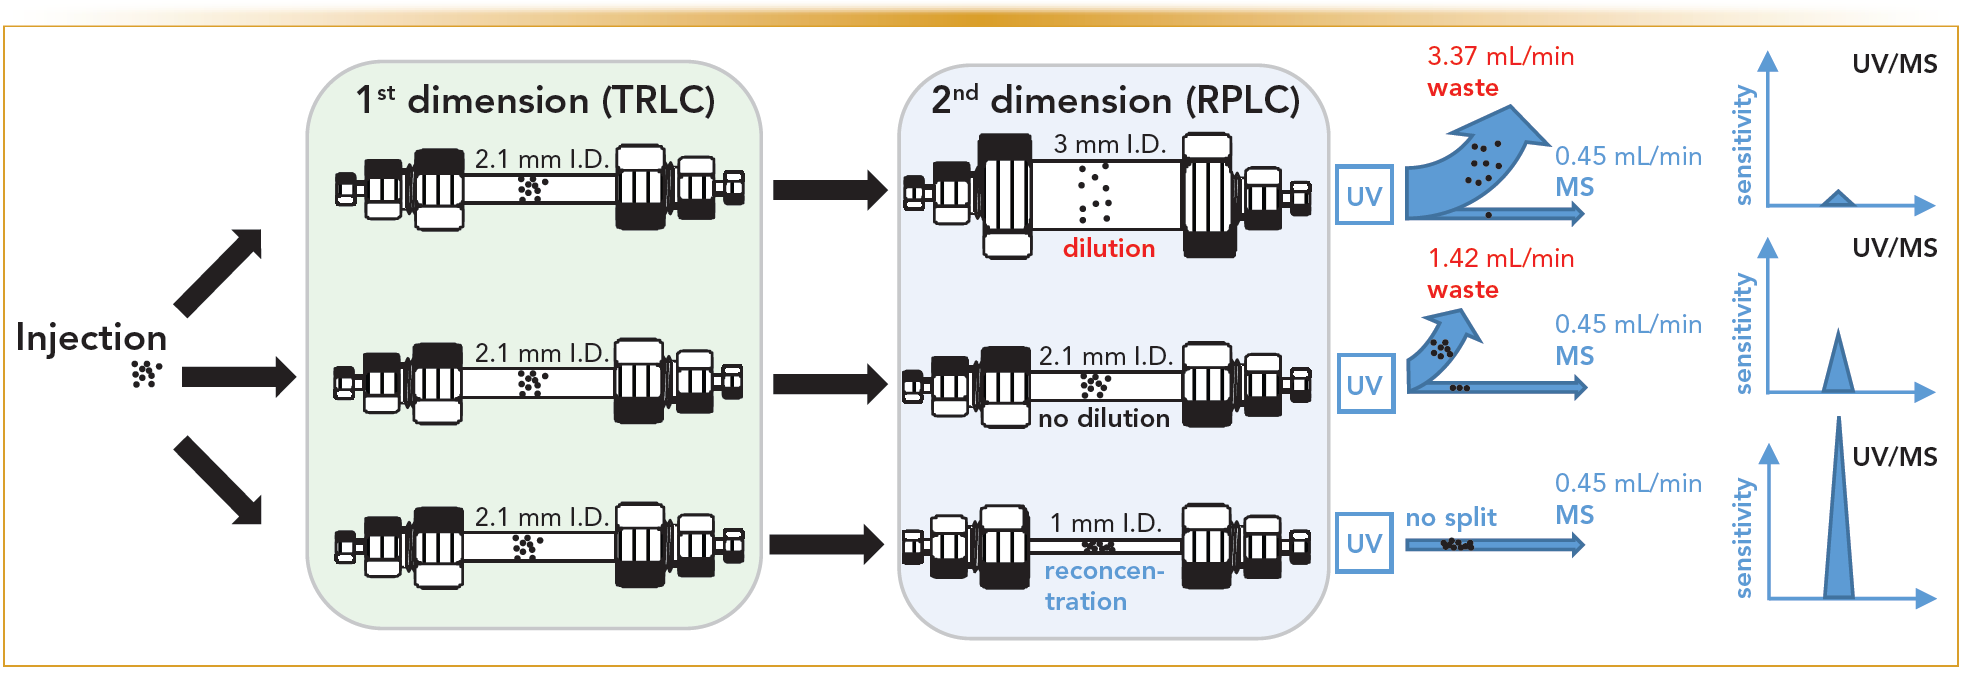 FIGURE 4: Schematic drawing of the dilution processes taking place in the various setups, together with the necessary large split ratios required when using broader columns in 2D with ESI-MS. The cumulative effects off the complete refocusing of the solutes on the RPLC column, the smaller radial dilution and the corresponding unnecessariness of flow-splitting on narrow 2D columns allows ultimately for enhanced ESI-MS (and UV) sensitivity.